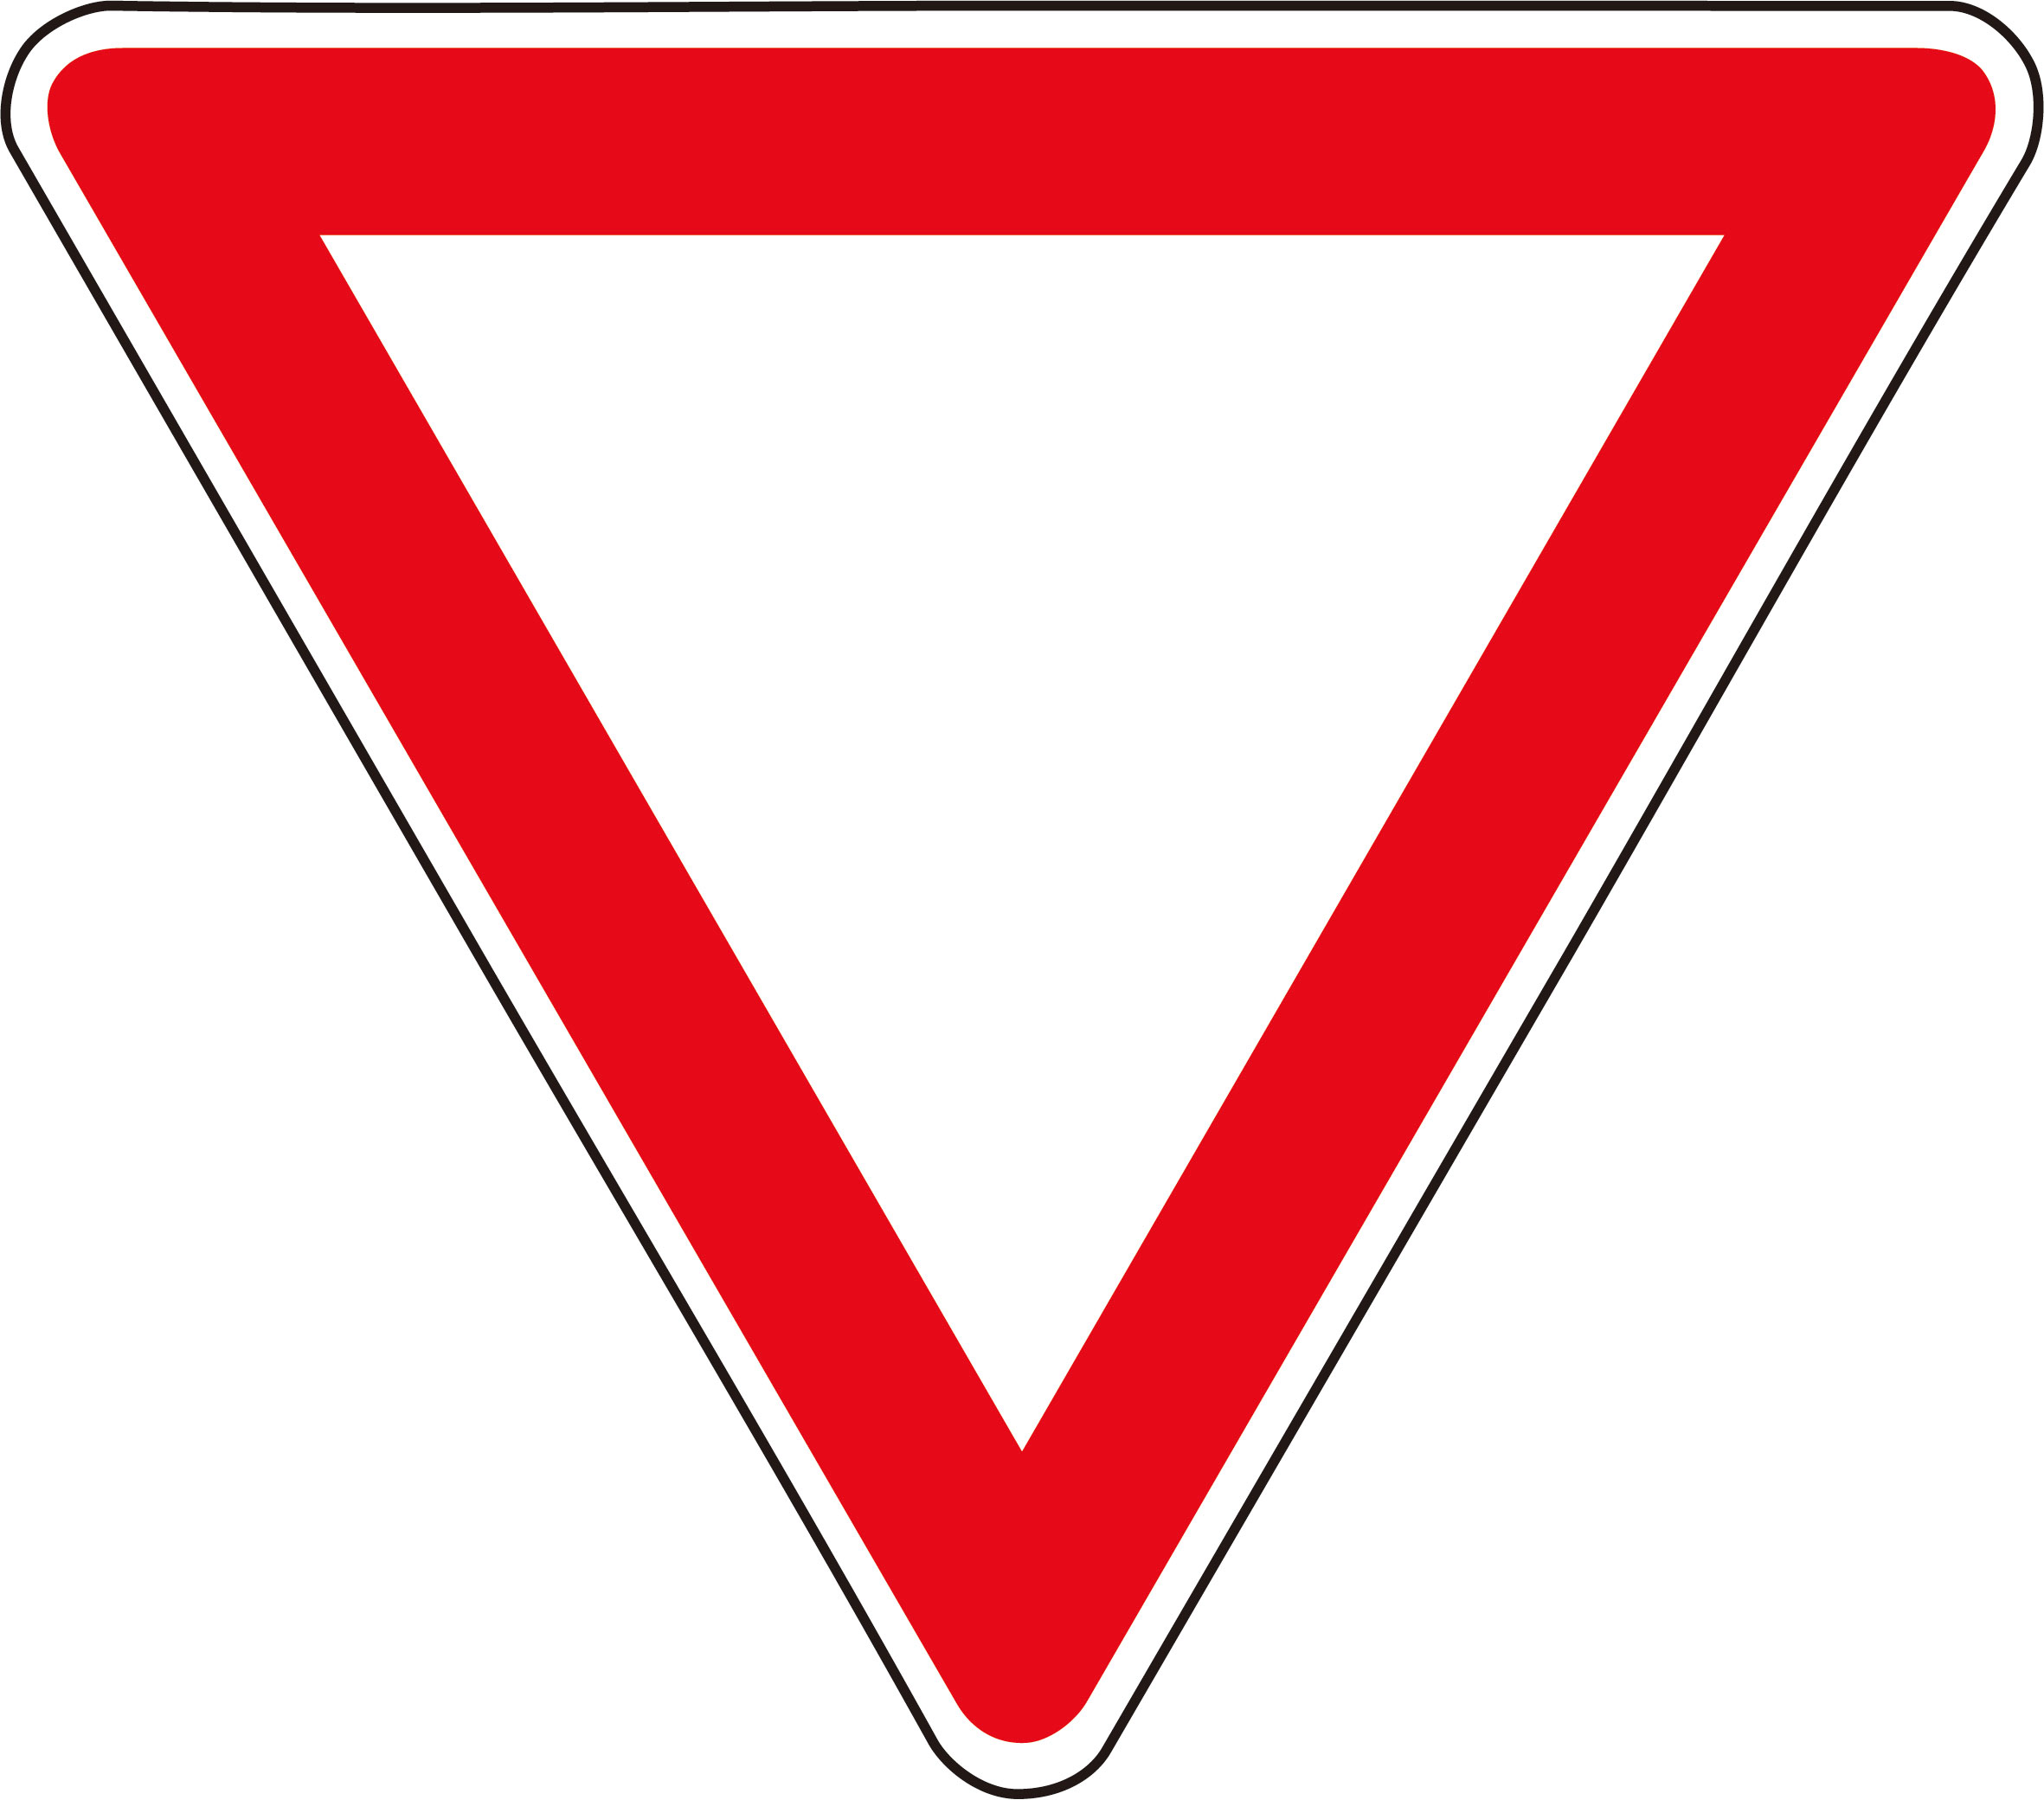 Triangle Road Sign - ClipArt Best